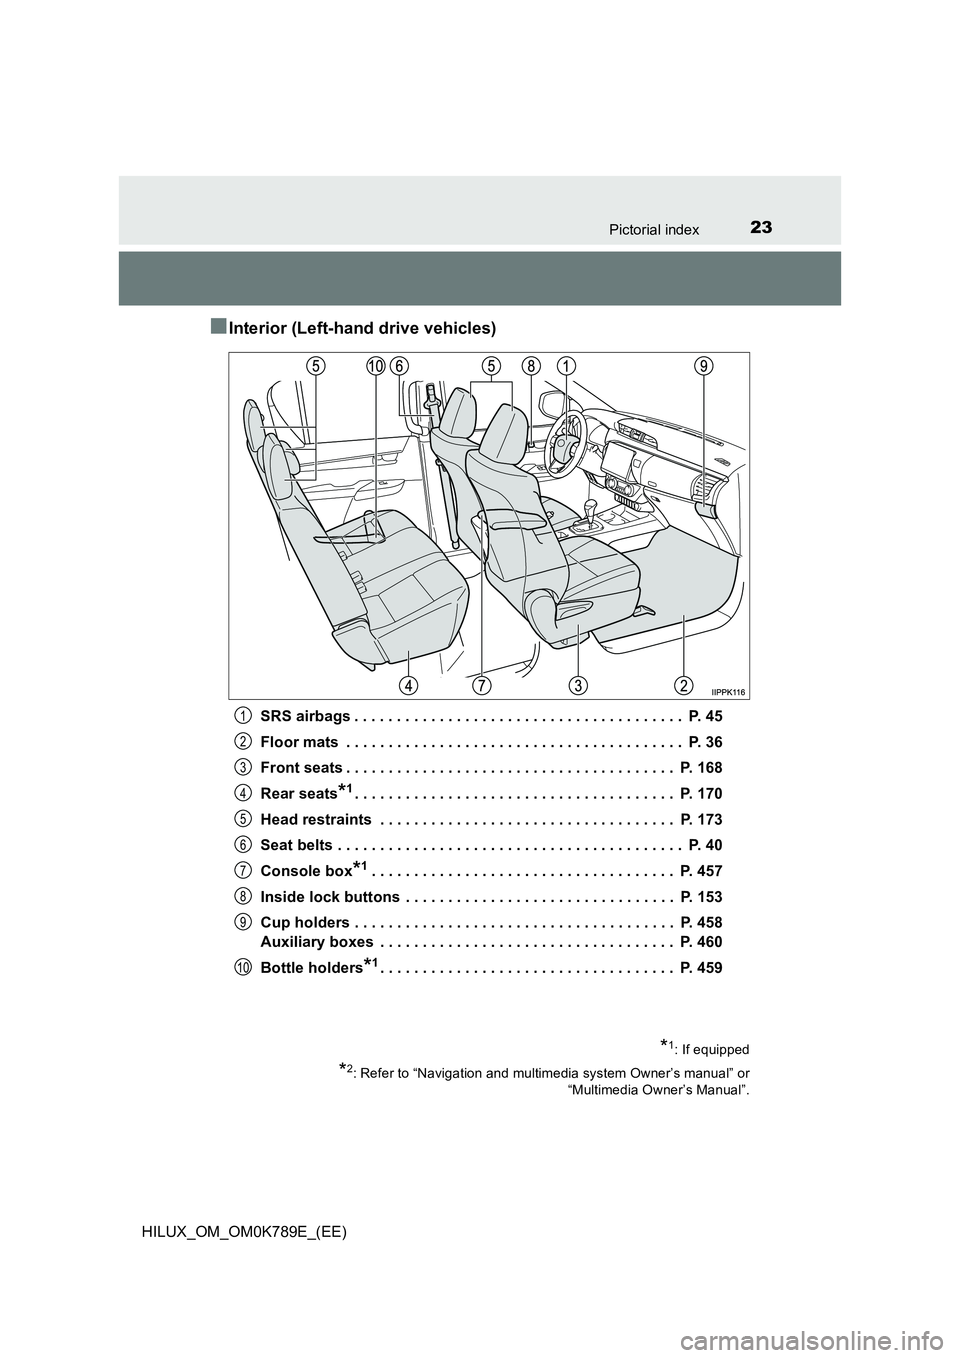 TOYOTA HILUX 2023 Owners Manual 23Pictorial index
HILUX_OM_OM0K789E_(EE)
■Interior (Left-hand drive vehicles)
SRS airbags . . . . . . . . . . . . . . . . . . . . . . . . . . . . . . . . . . . . . . .  P. 45 
Floor mats  . . . . . 